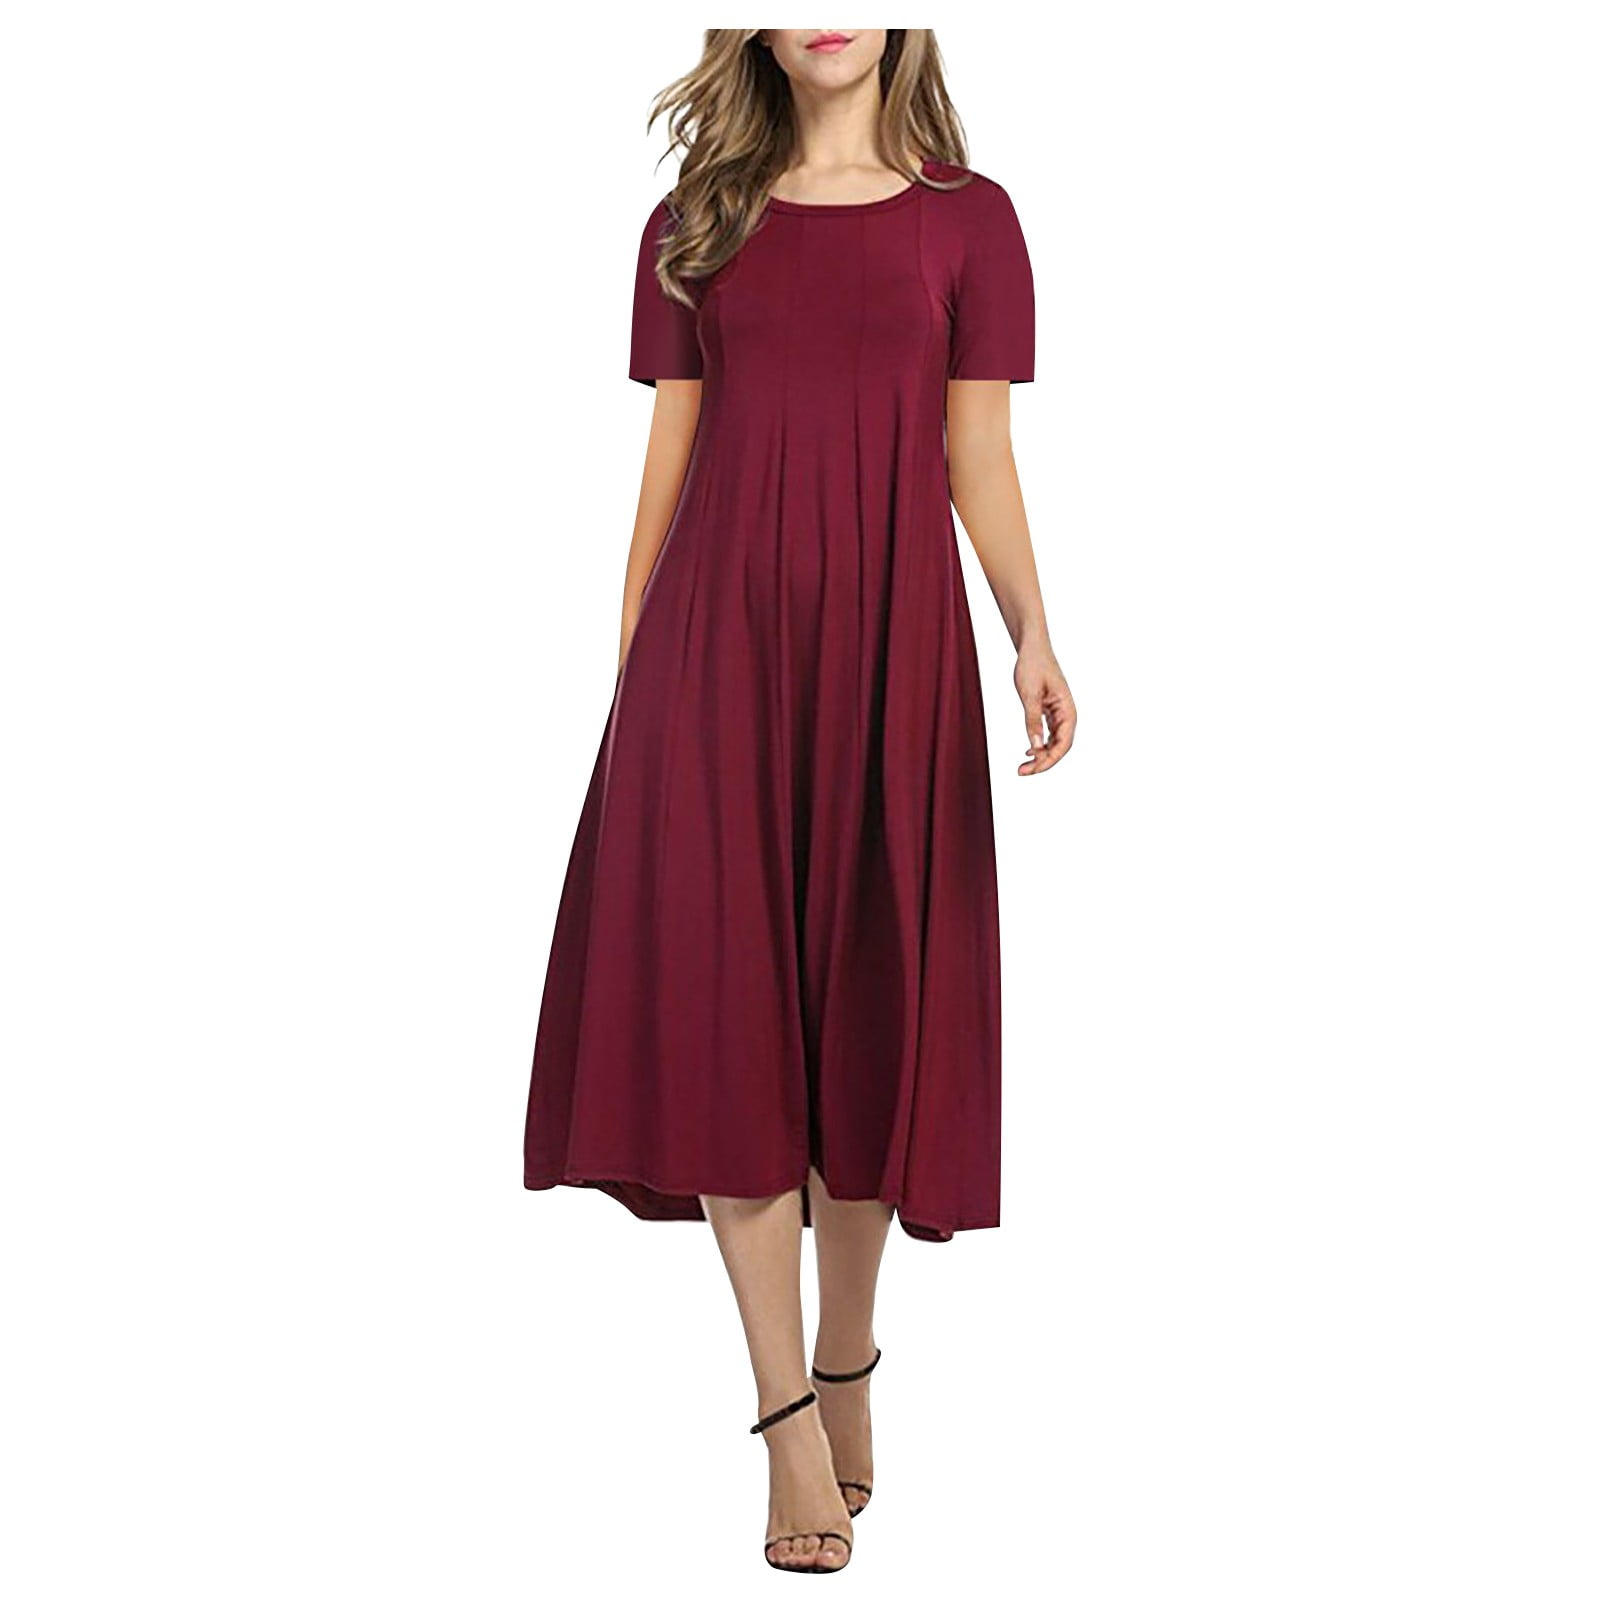 BEEYASO Clearance Summer Dresses for Women Short Sleeve A-Line Mid-Length  Casual Round Neckline Solid Dress Red m 